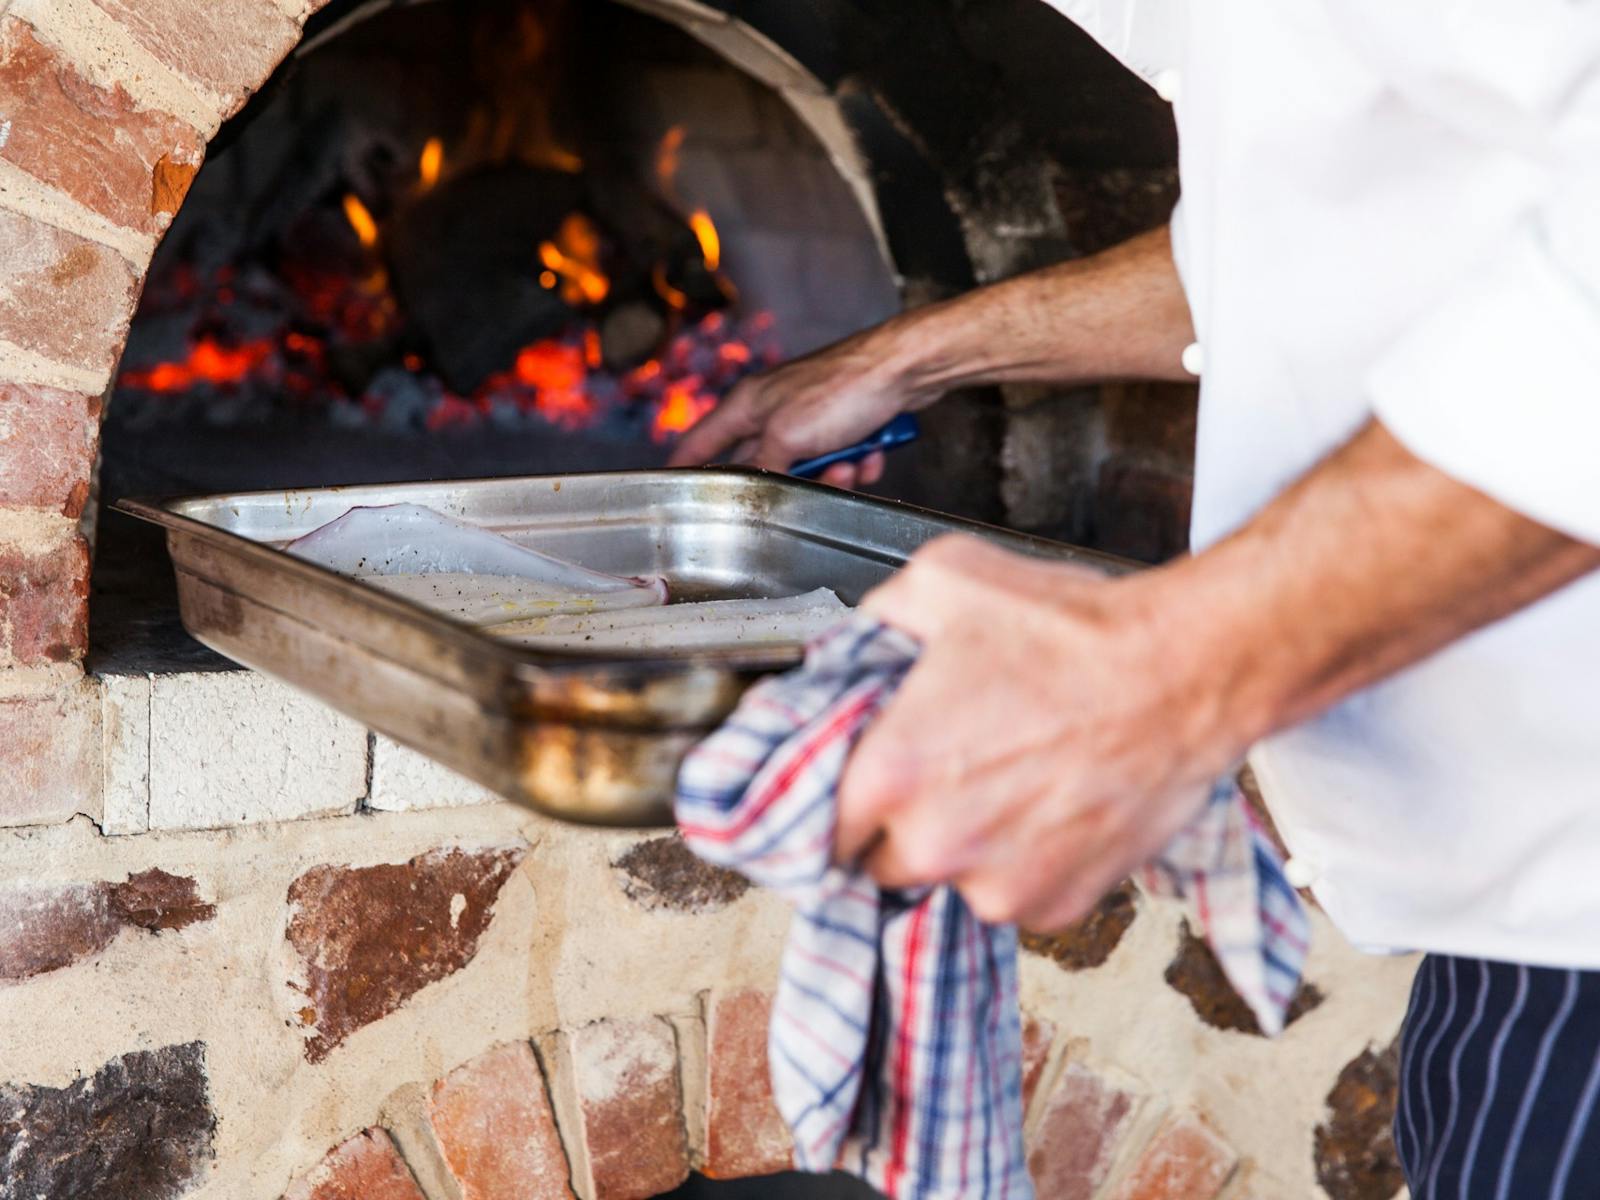 Cooking in the wood oven